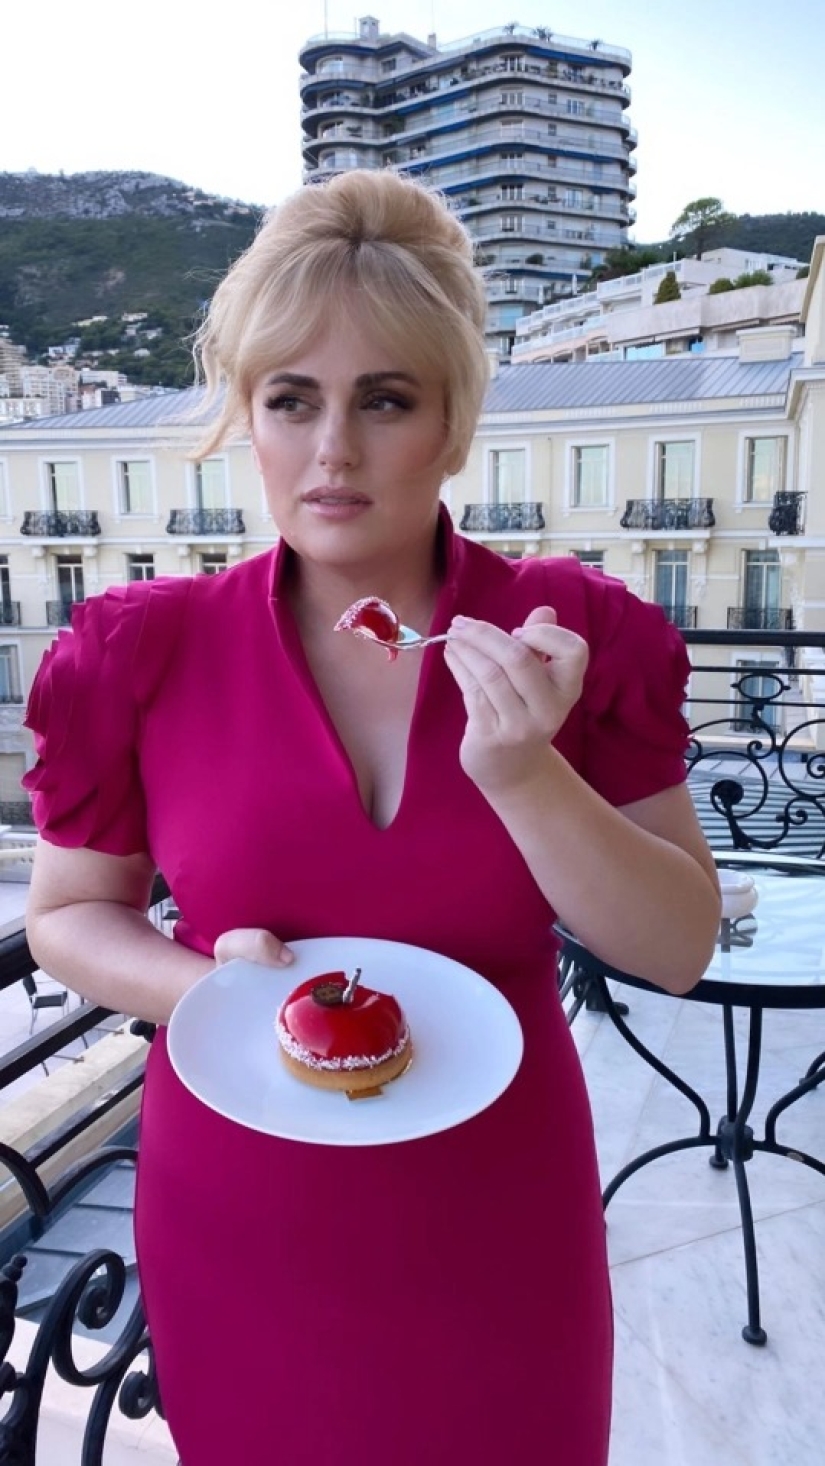 From crumpet to skinny: 5 secrets of losing weight from Rebel Wilson